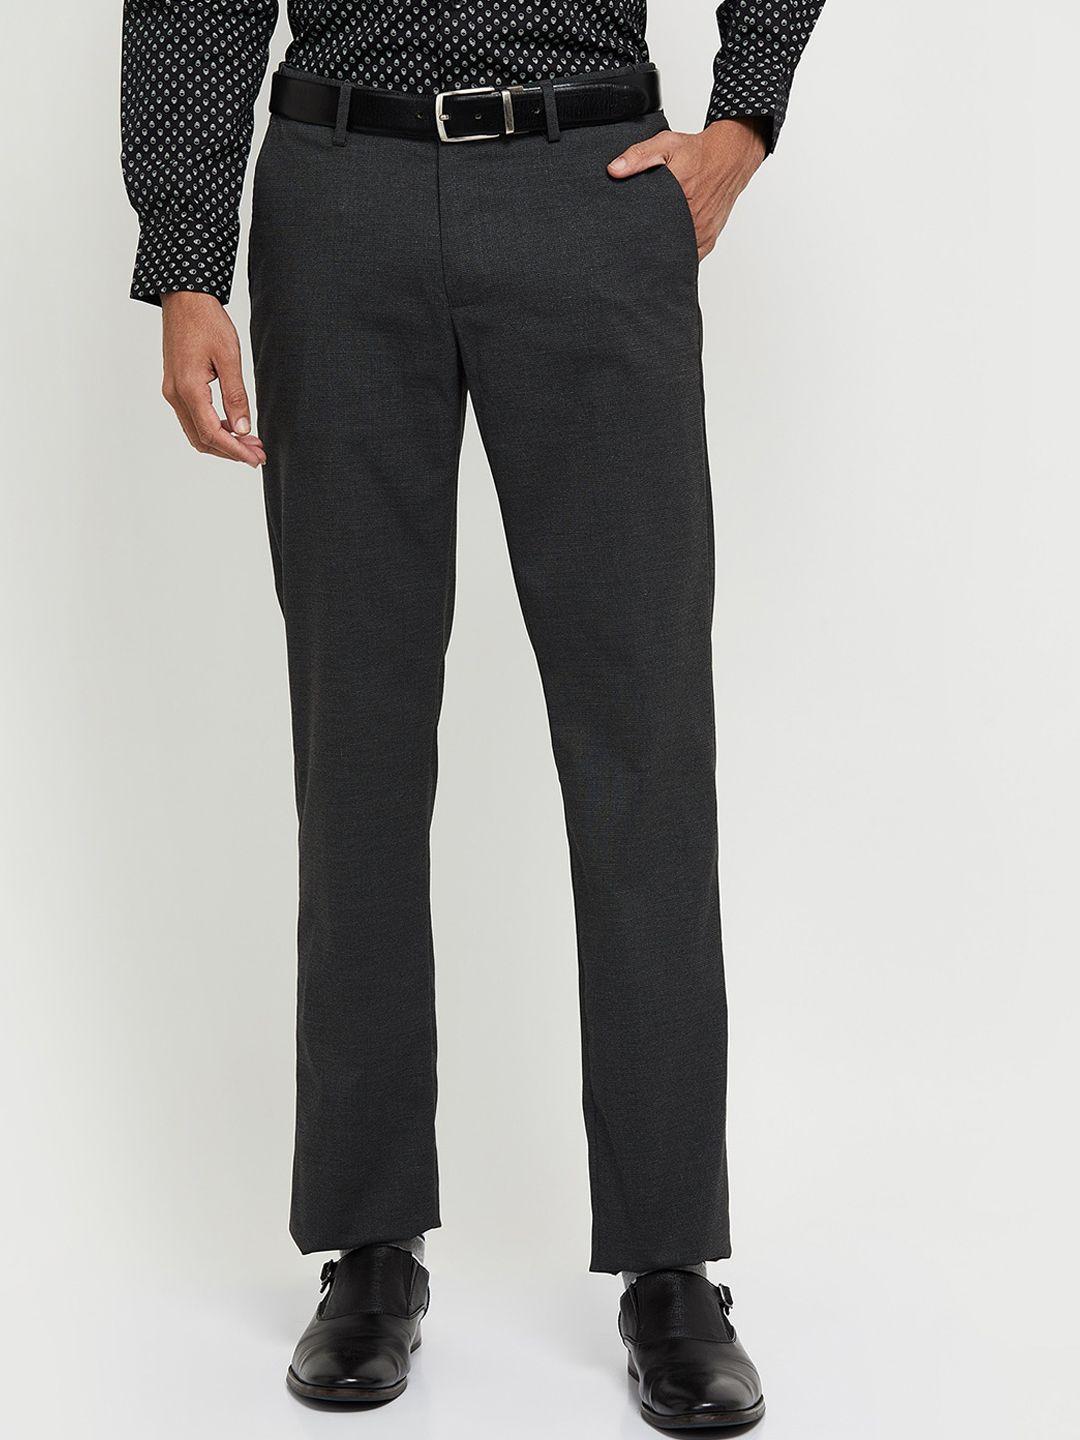 max-men-charcoal-formal-trousers